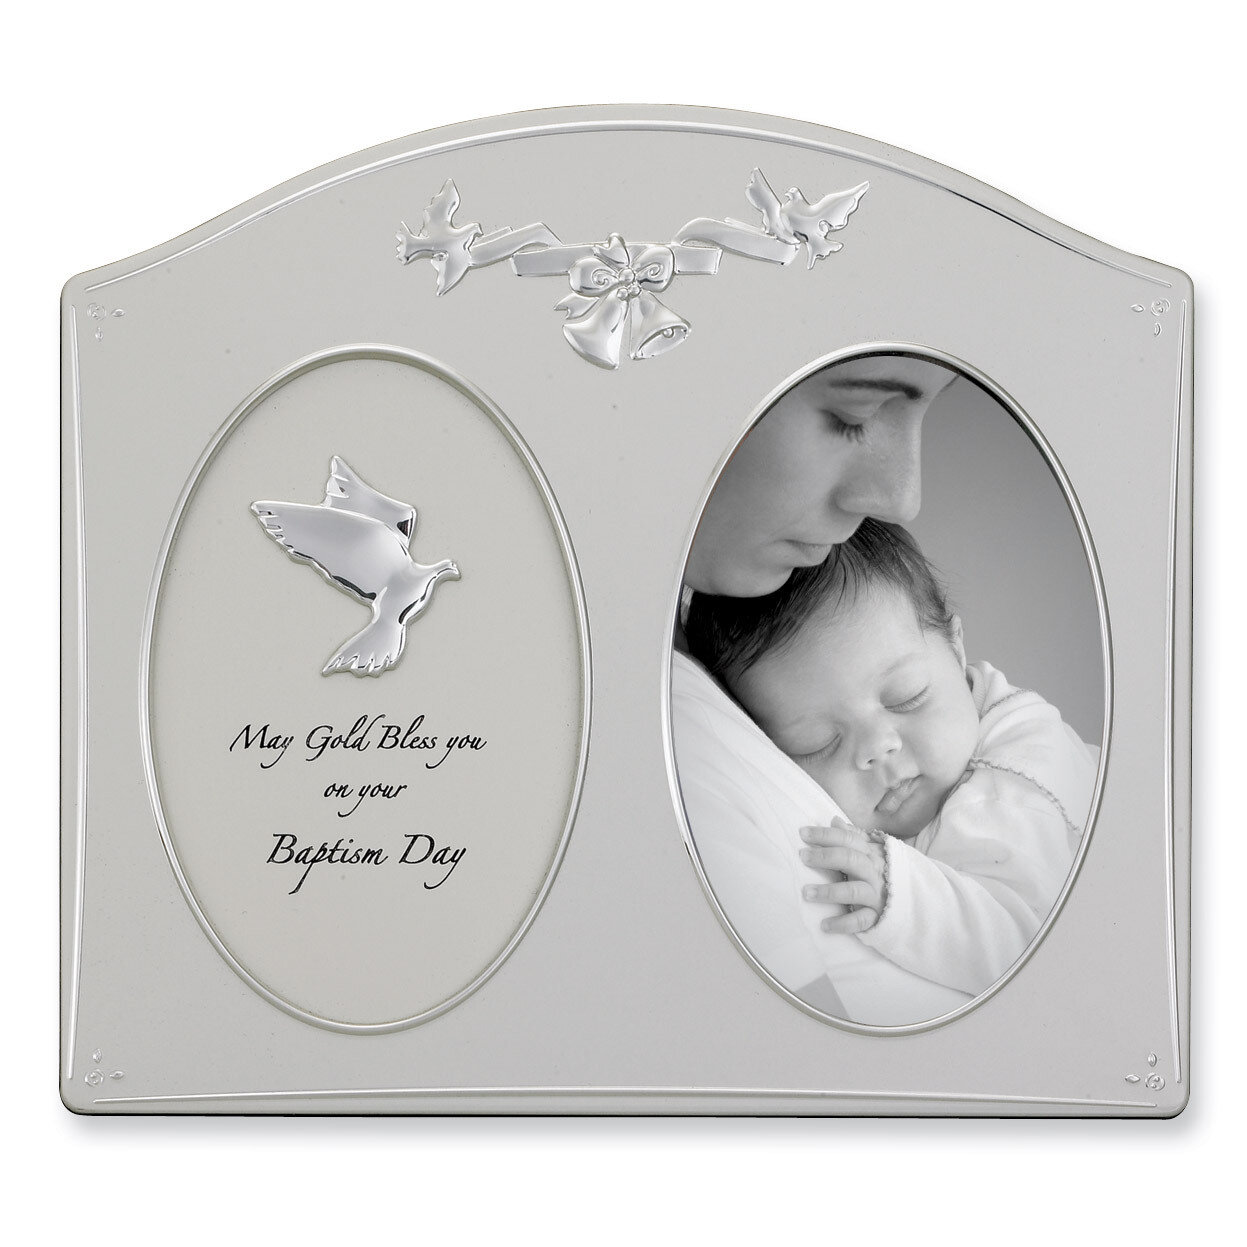 Baptism Day 4 x 6 Inch Picture Frame GM4583